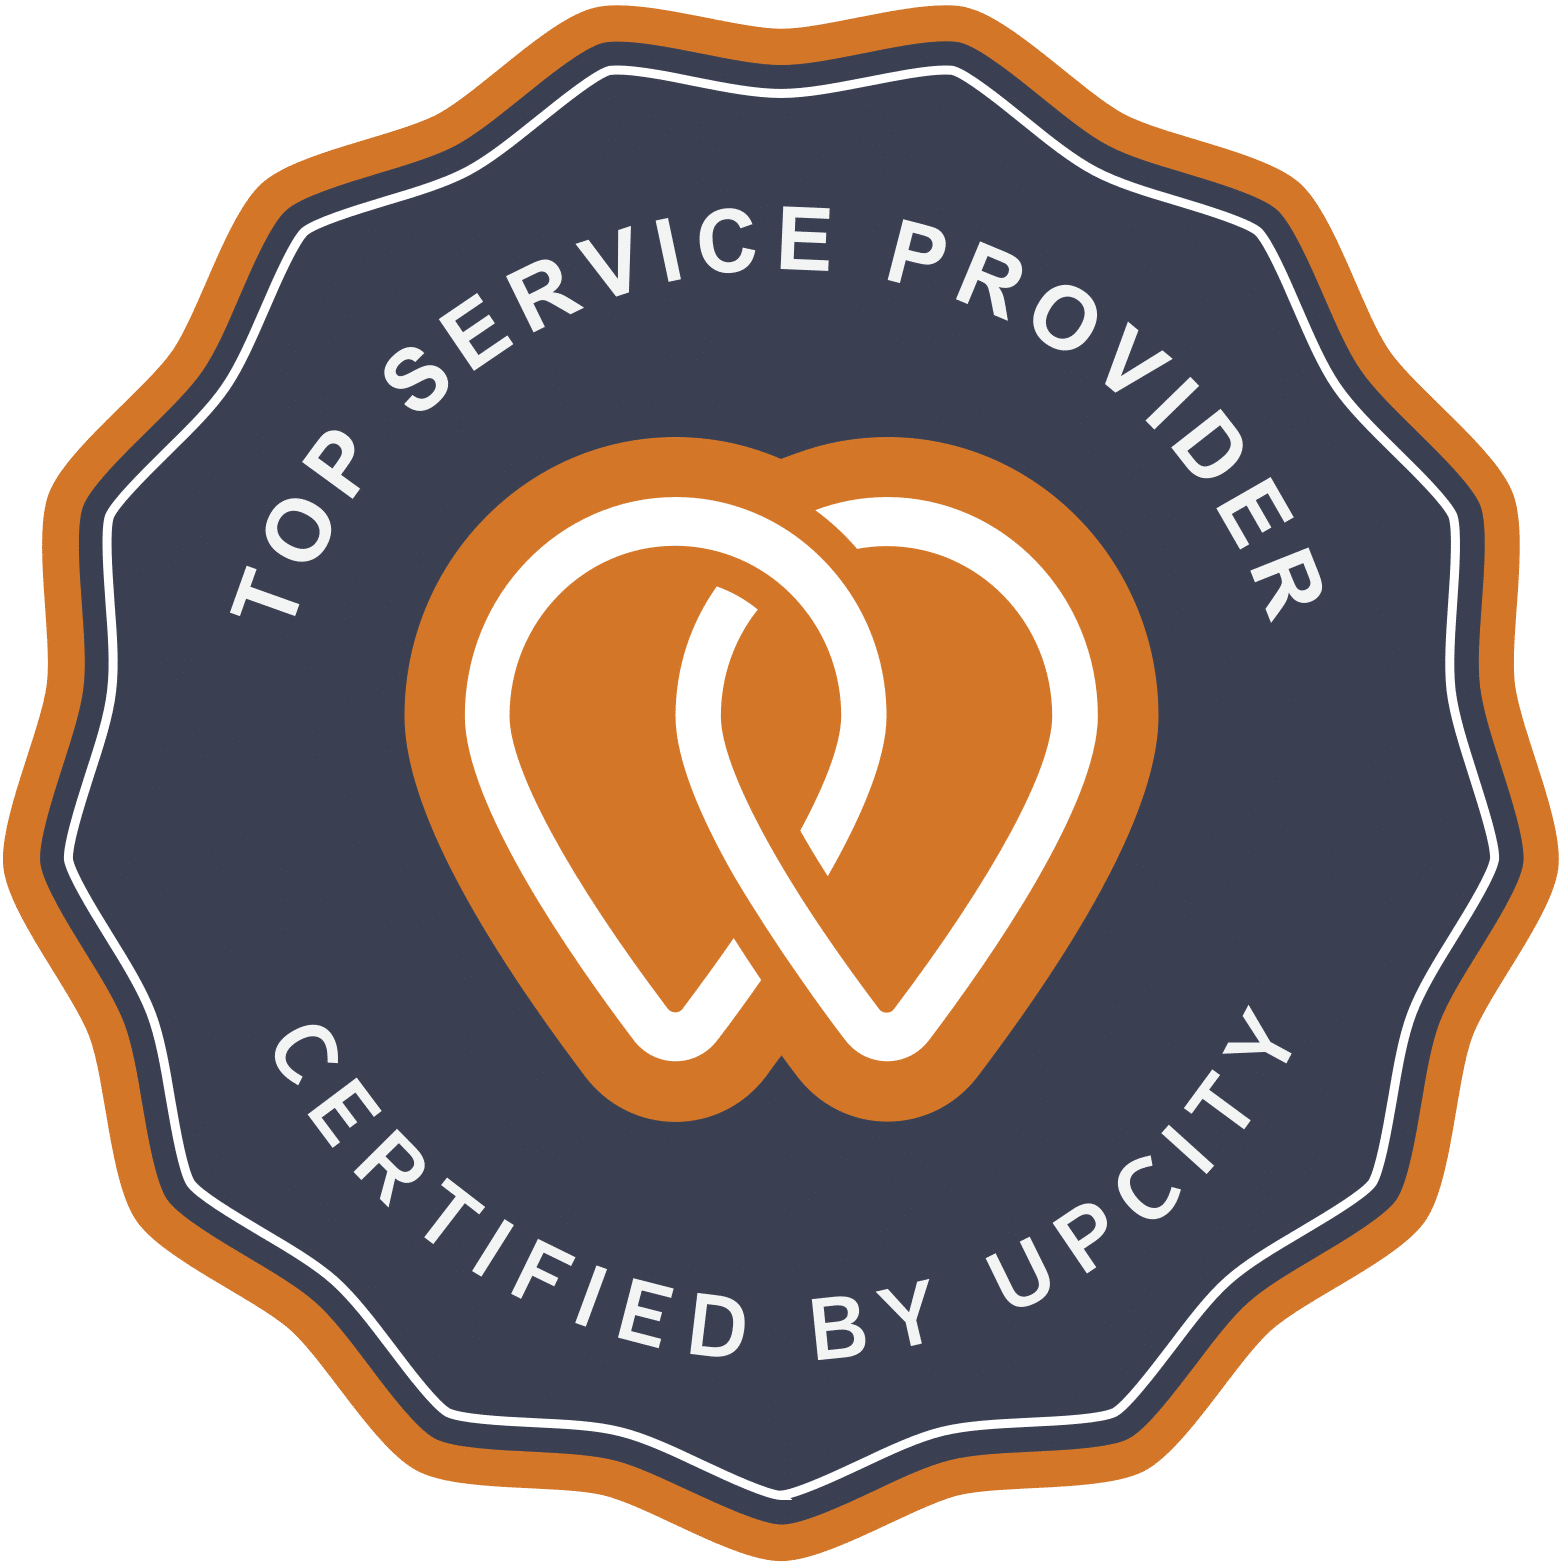 Artax-Digital-Solutions_Top-Service-Provider_Cerified-by-UpCity